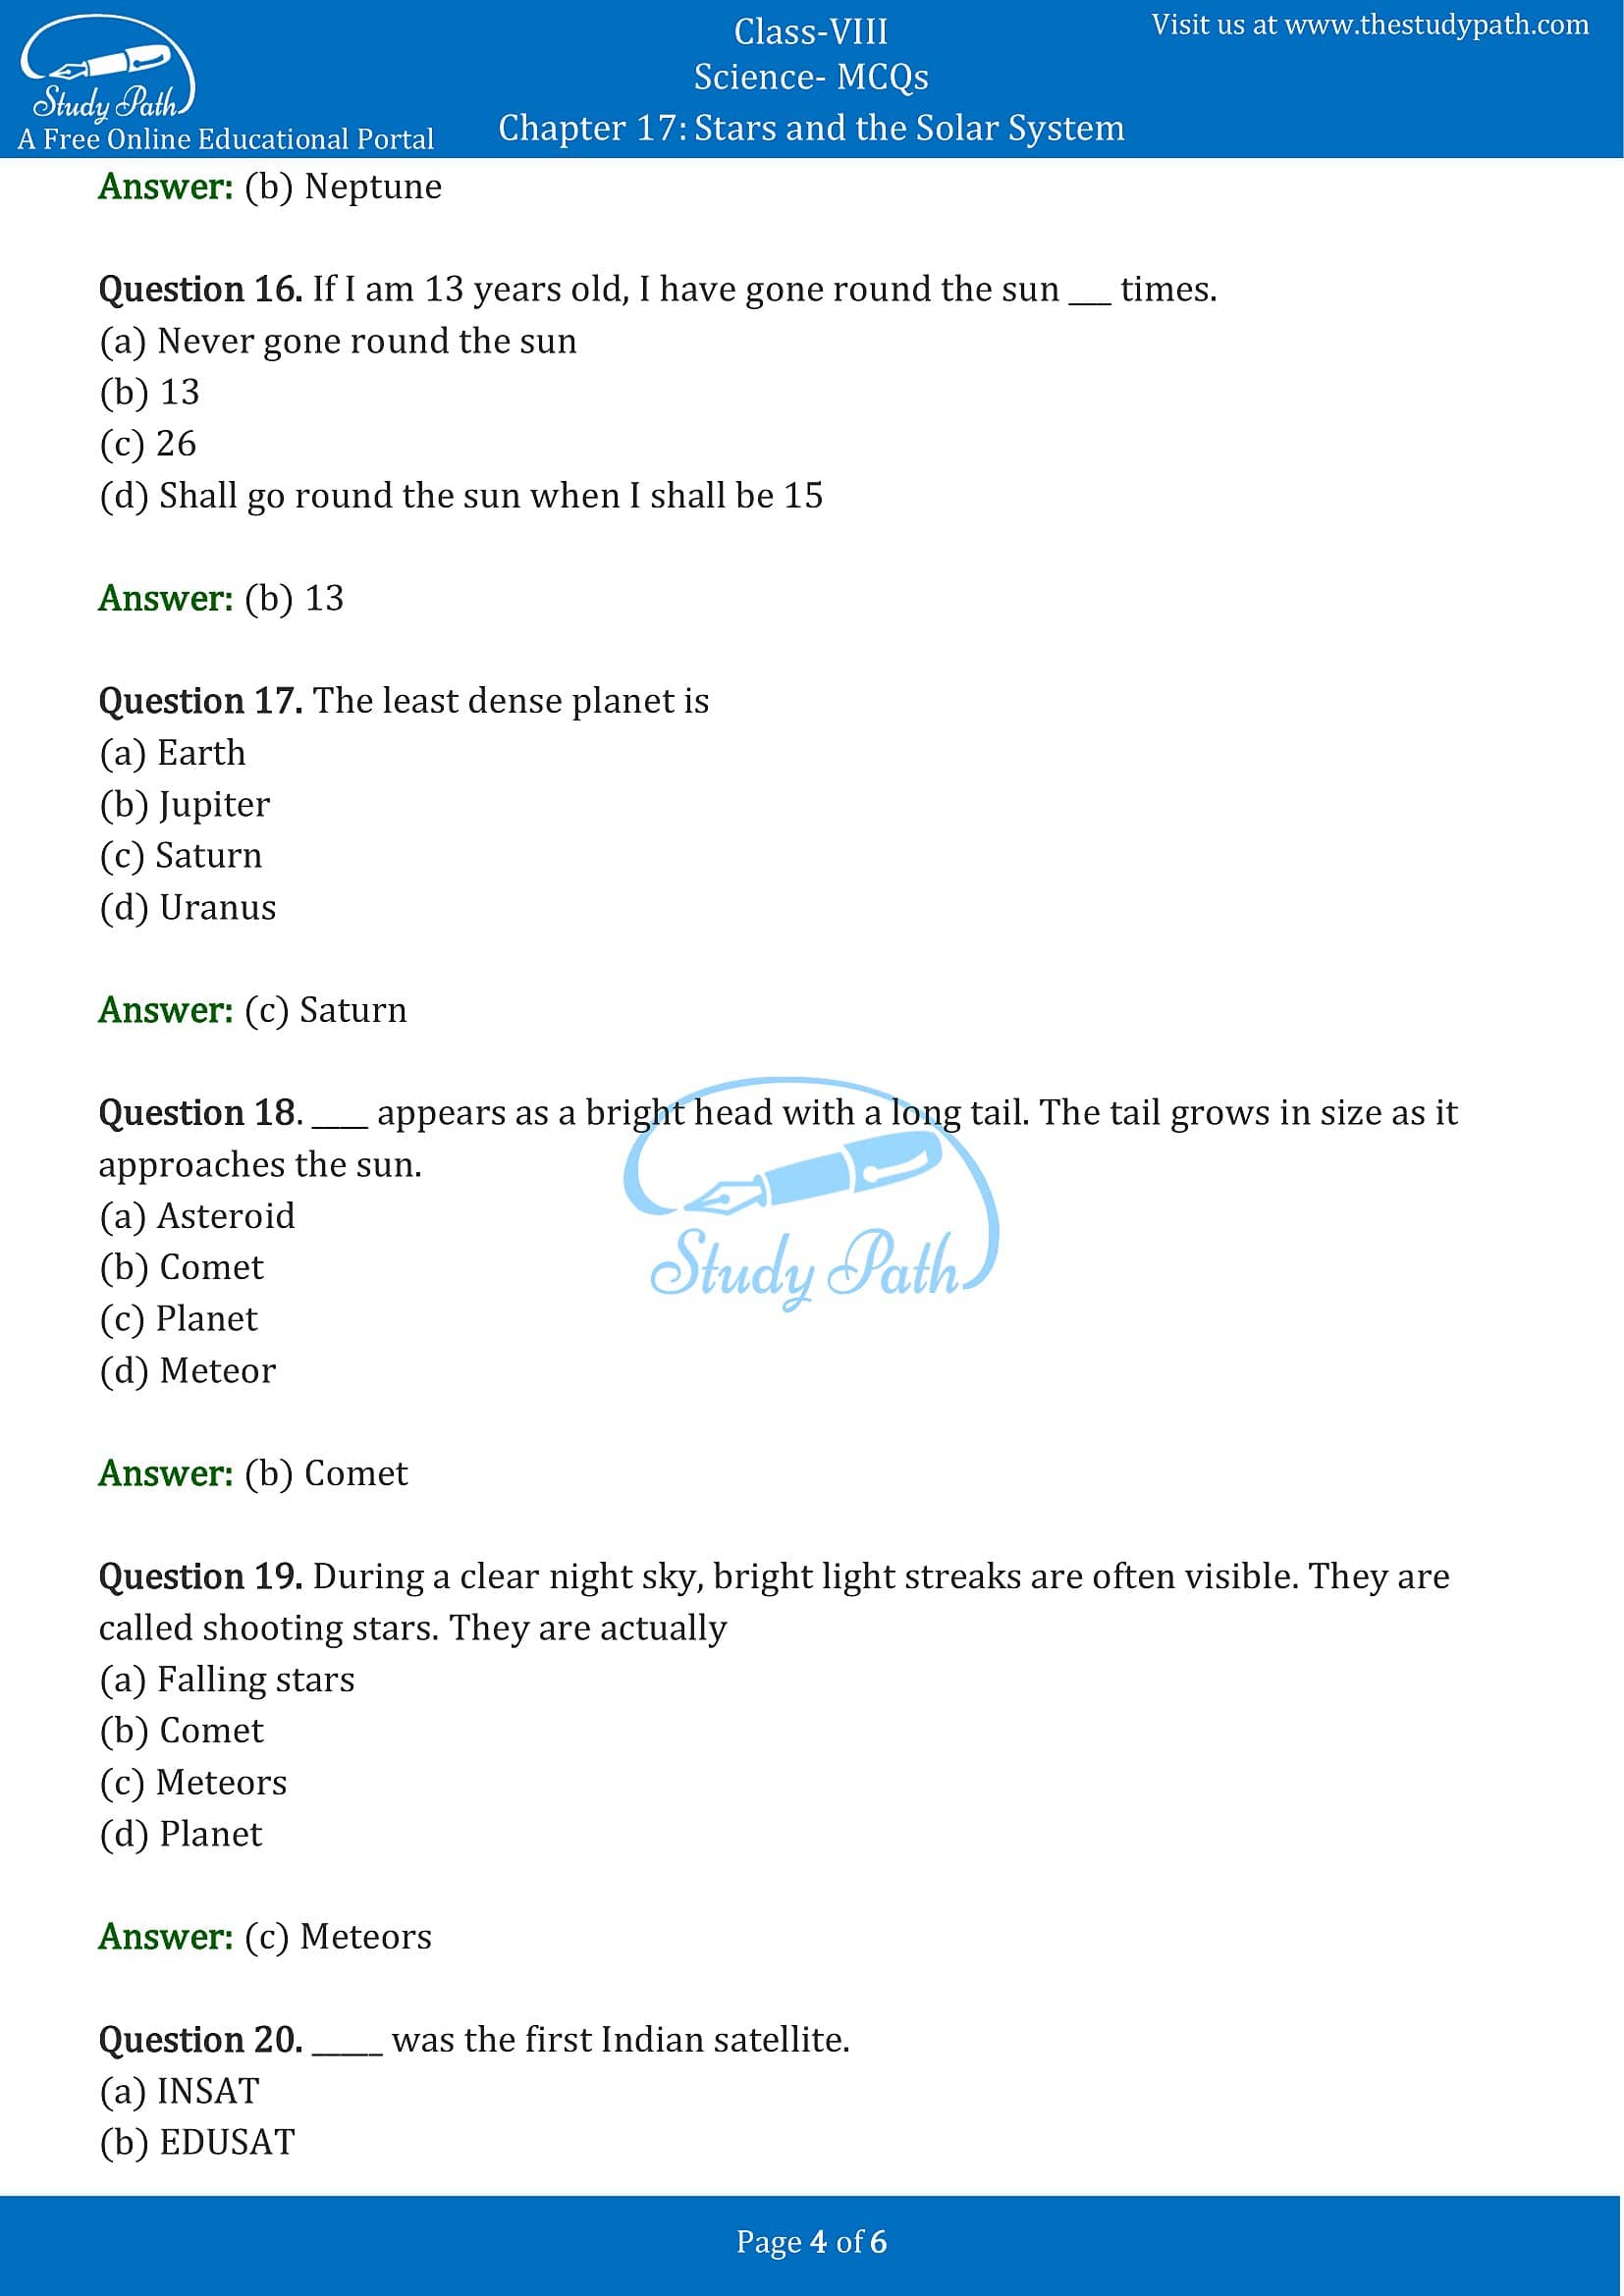 MCQ Questions for Class 8 Science Chapter 17 Stars and the Solar System with Answers PDF -4